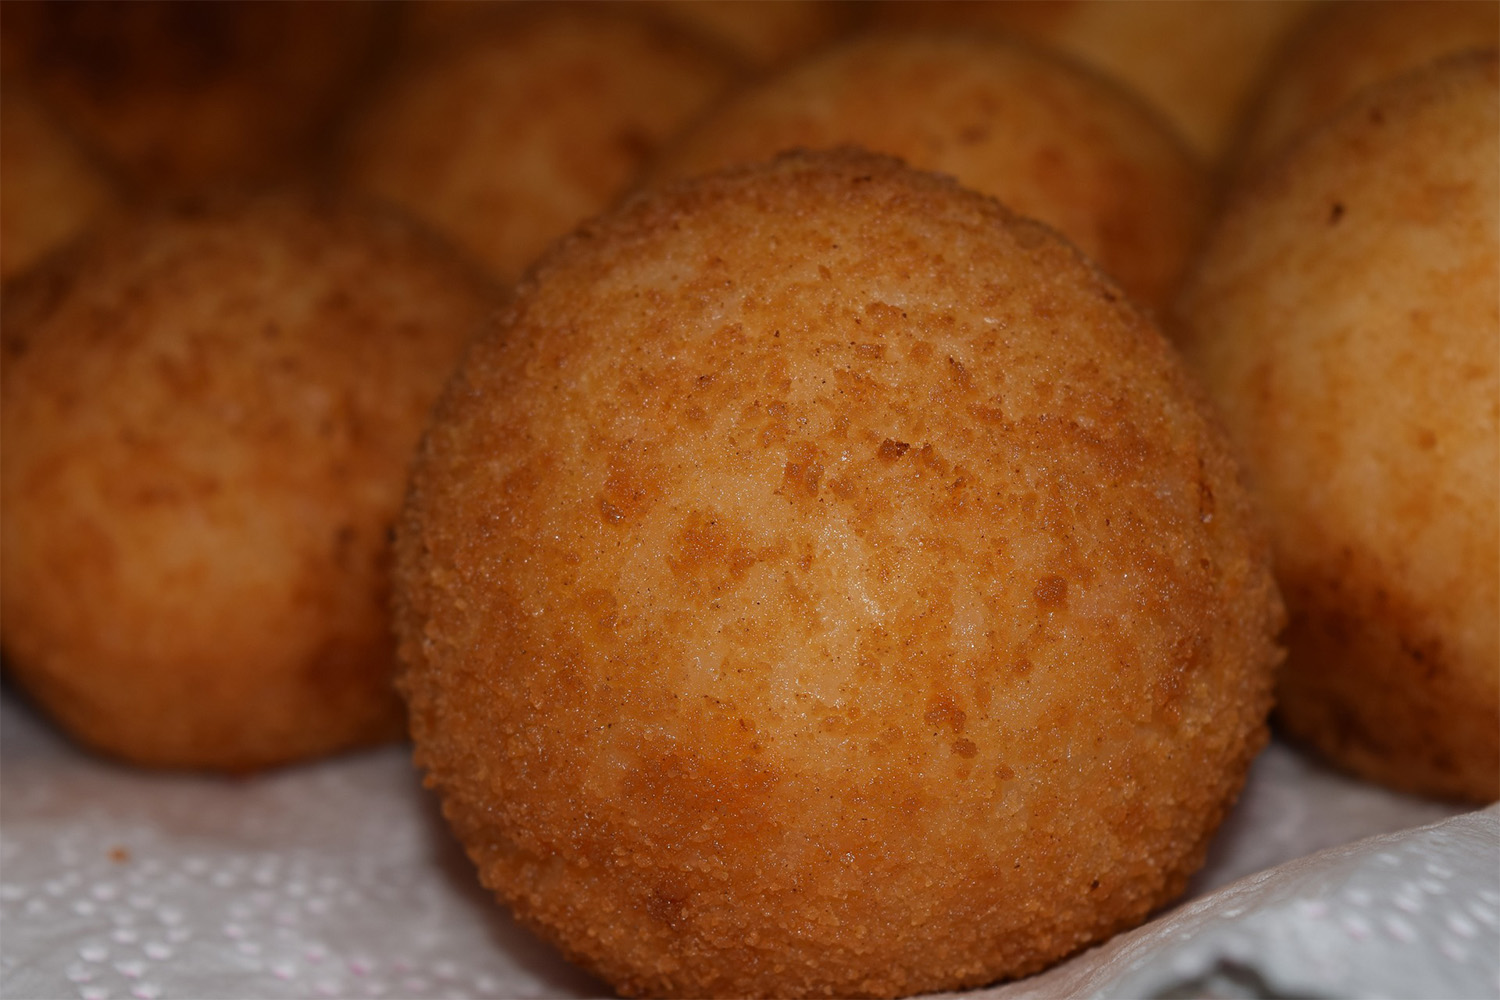 zoomed in view of fried arancini balls on a paper towel 